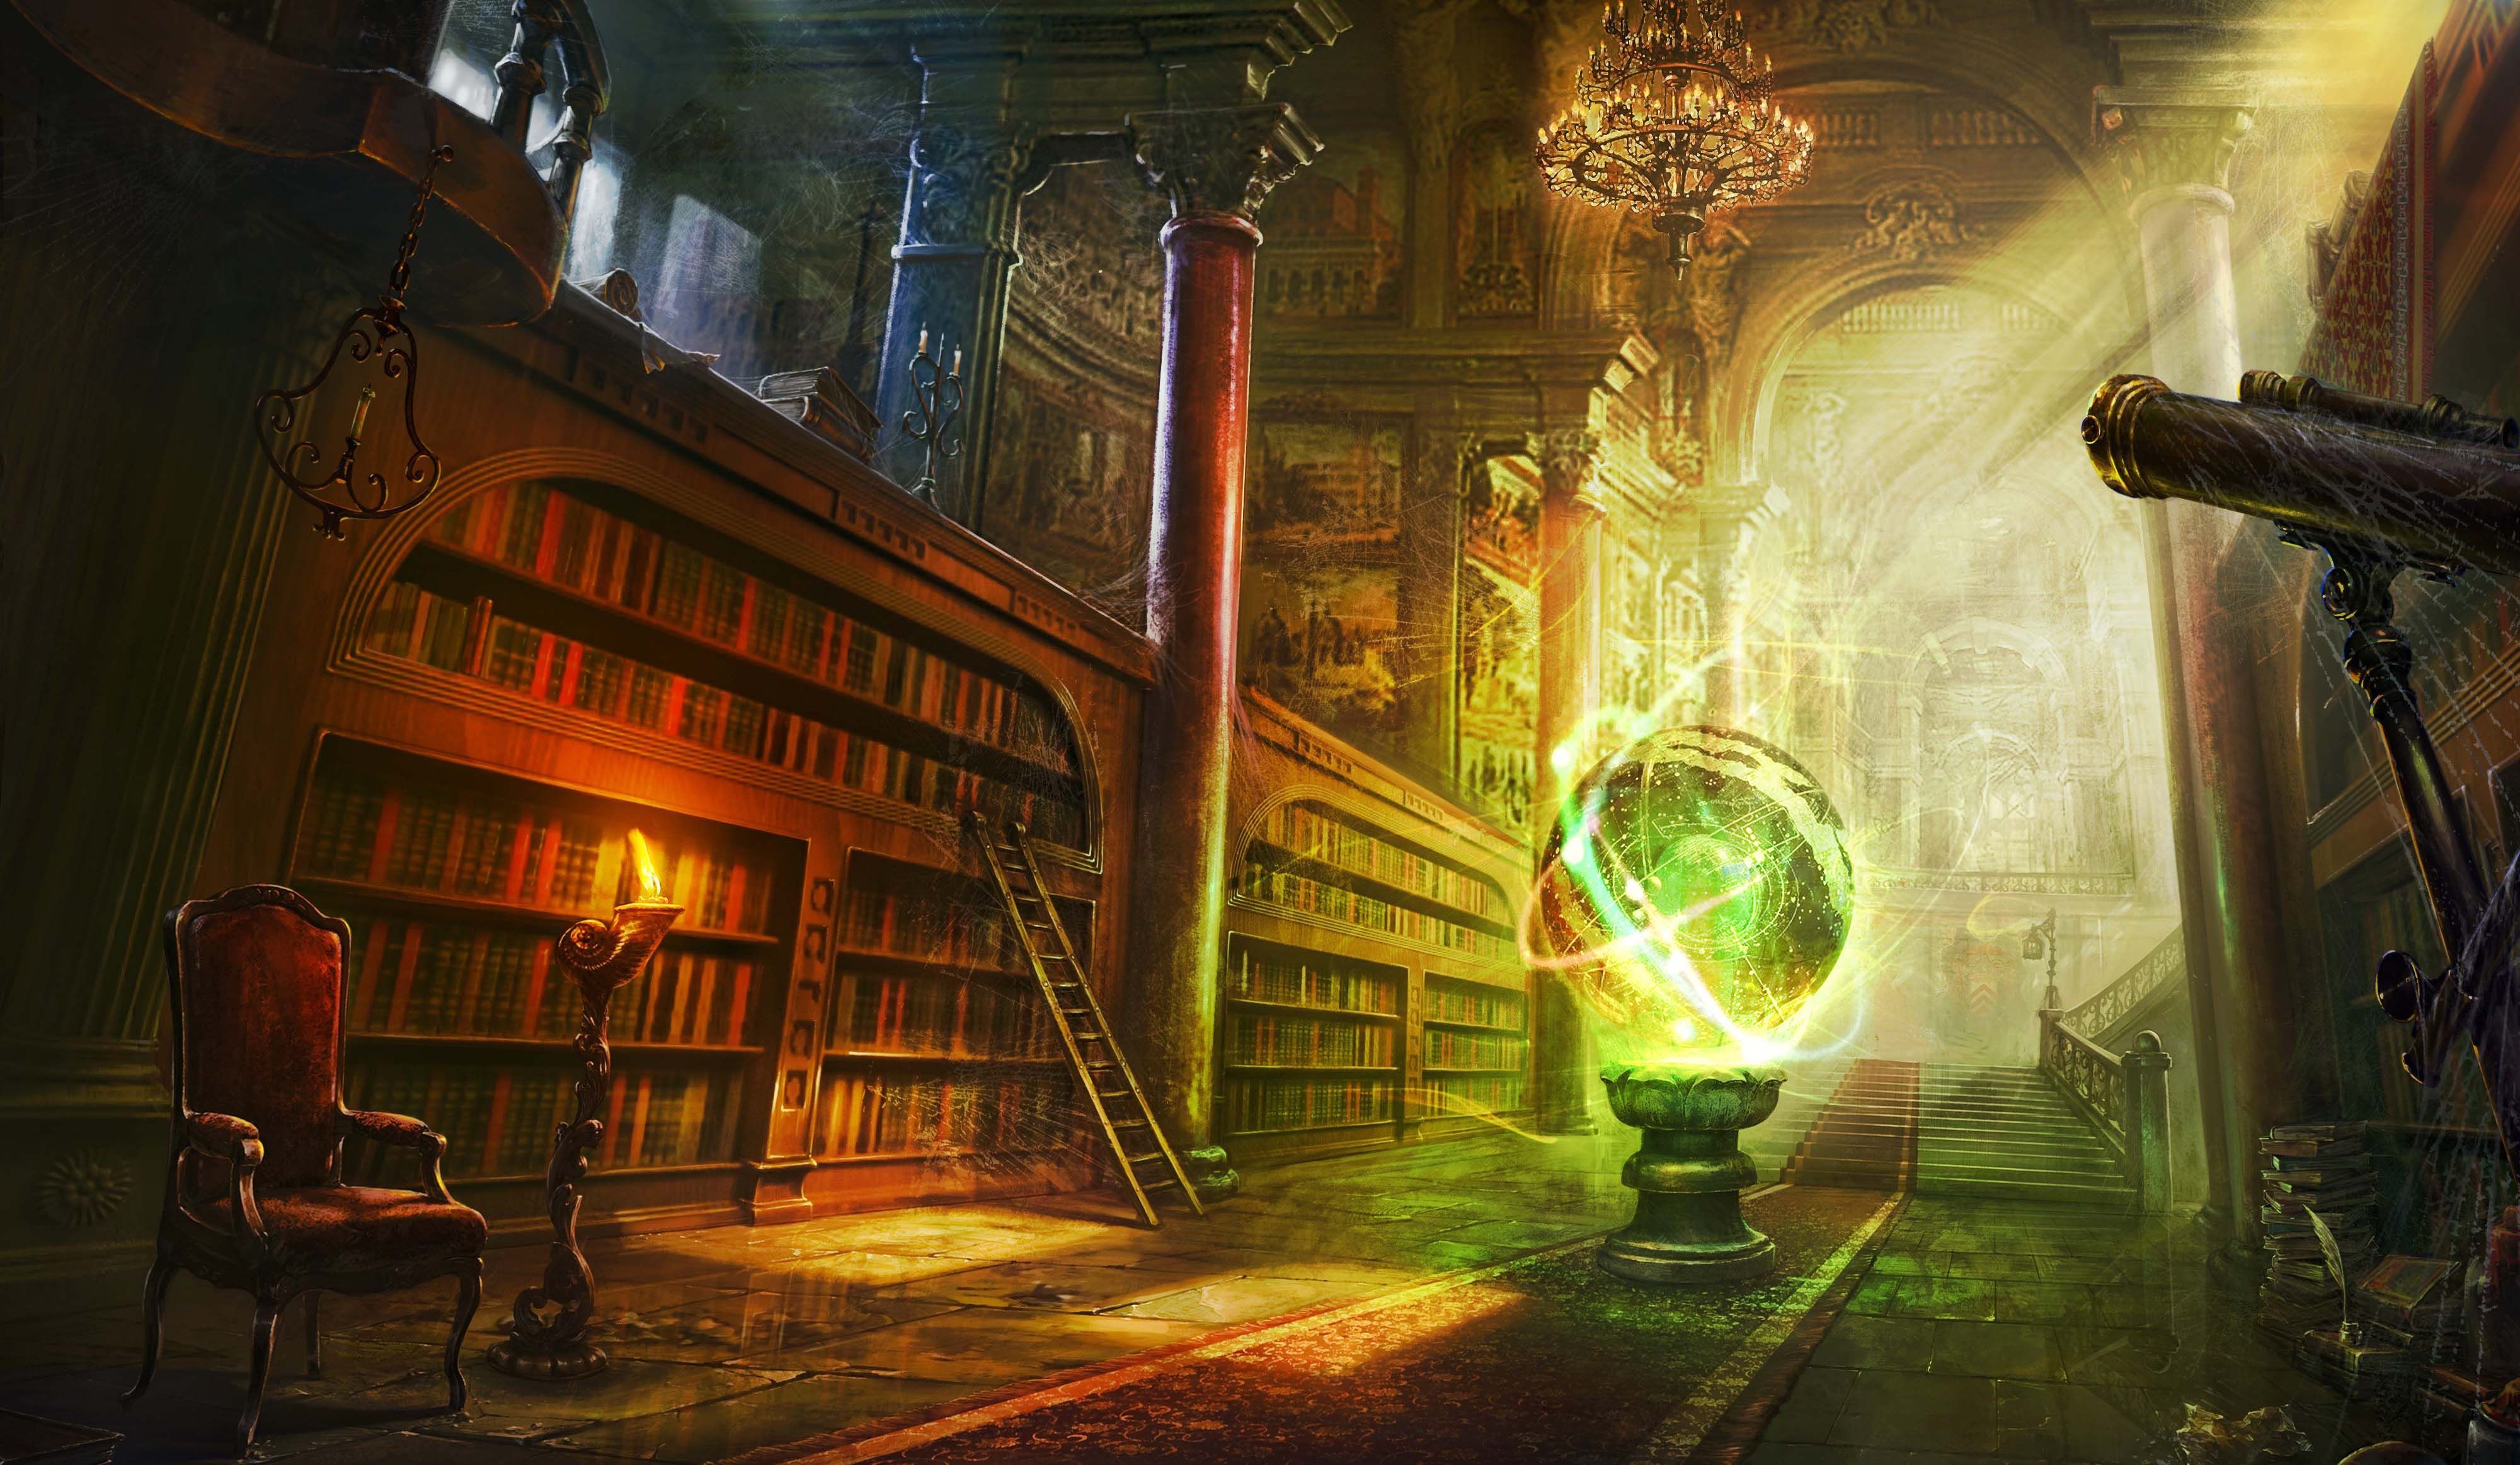 Download HD wallpaper of Fantasy Library Art. Free download High Quality and Widescreen Resolutions Desktop Background I. Library art, Anime scenery, Fantasy art